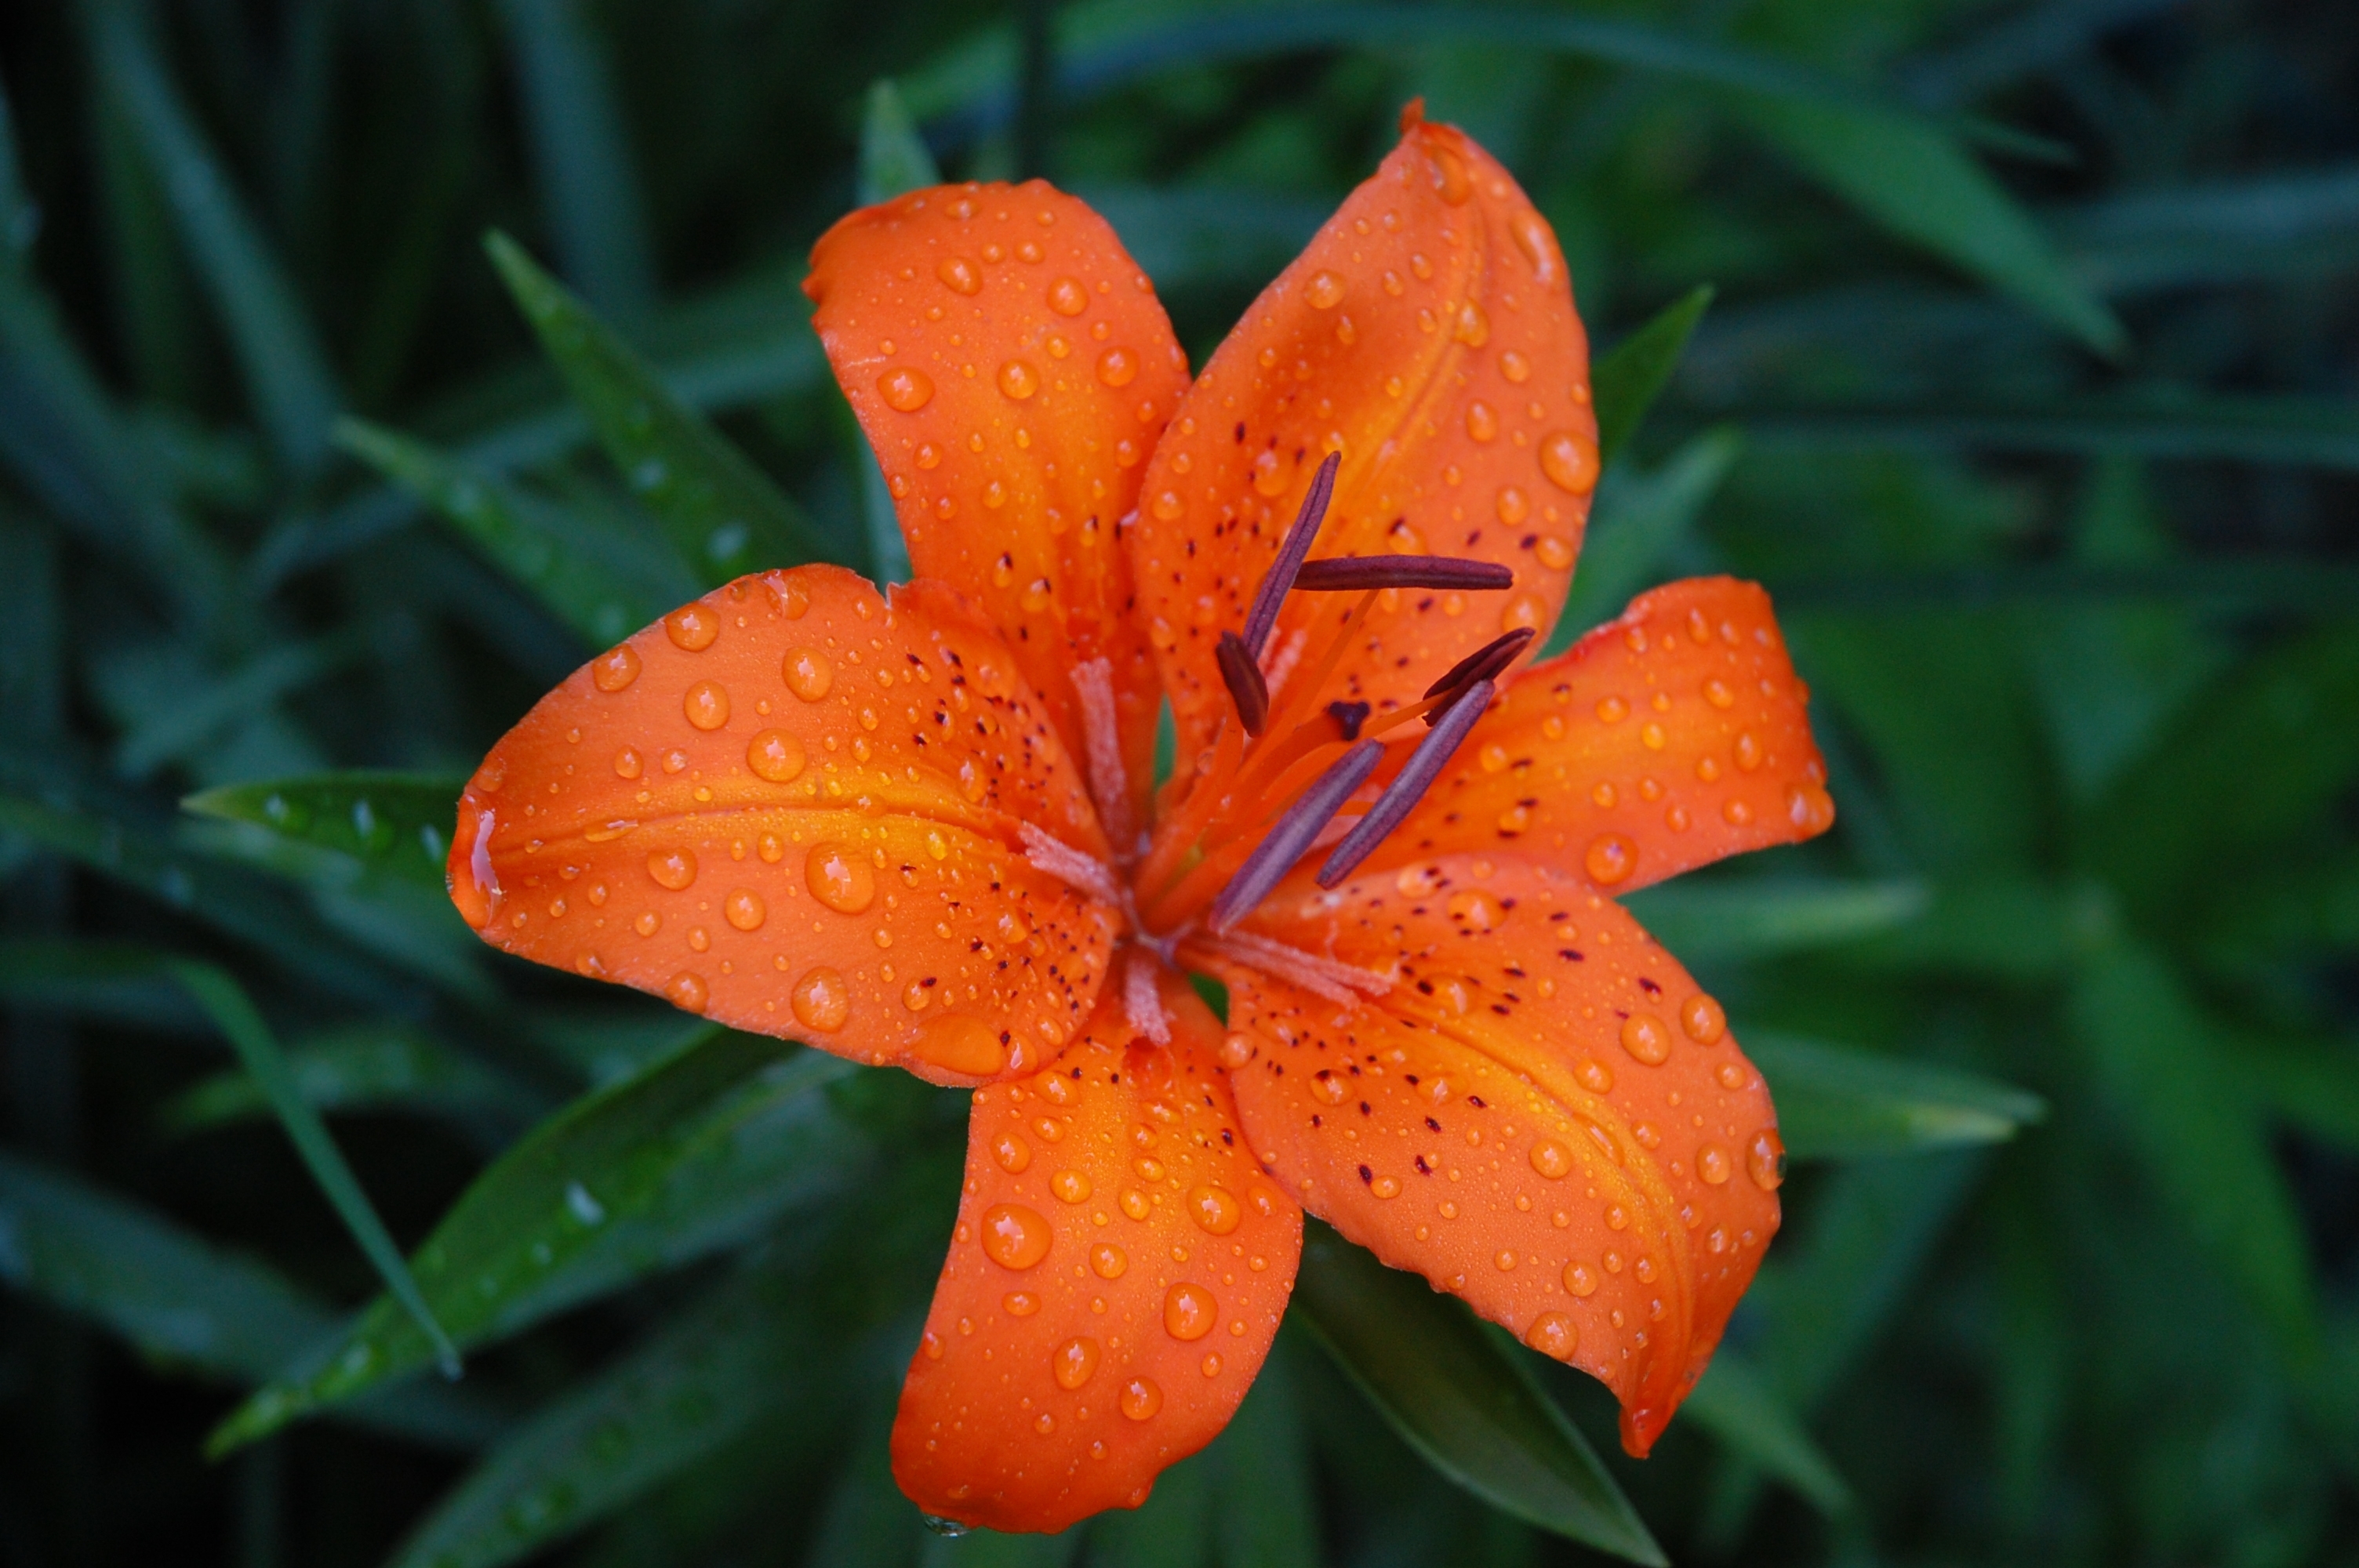 file:nln tiger lily - wikimedia commons